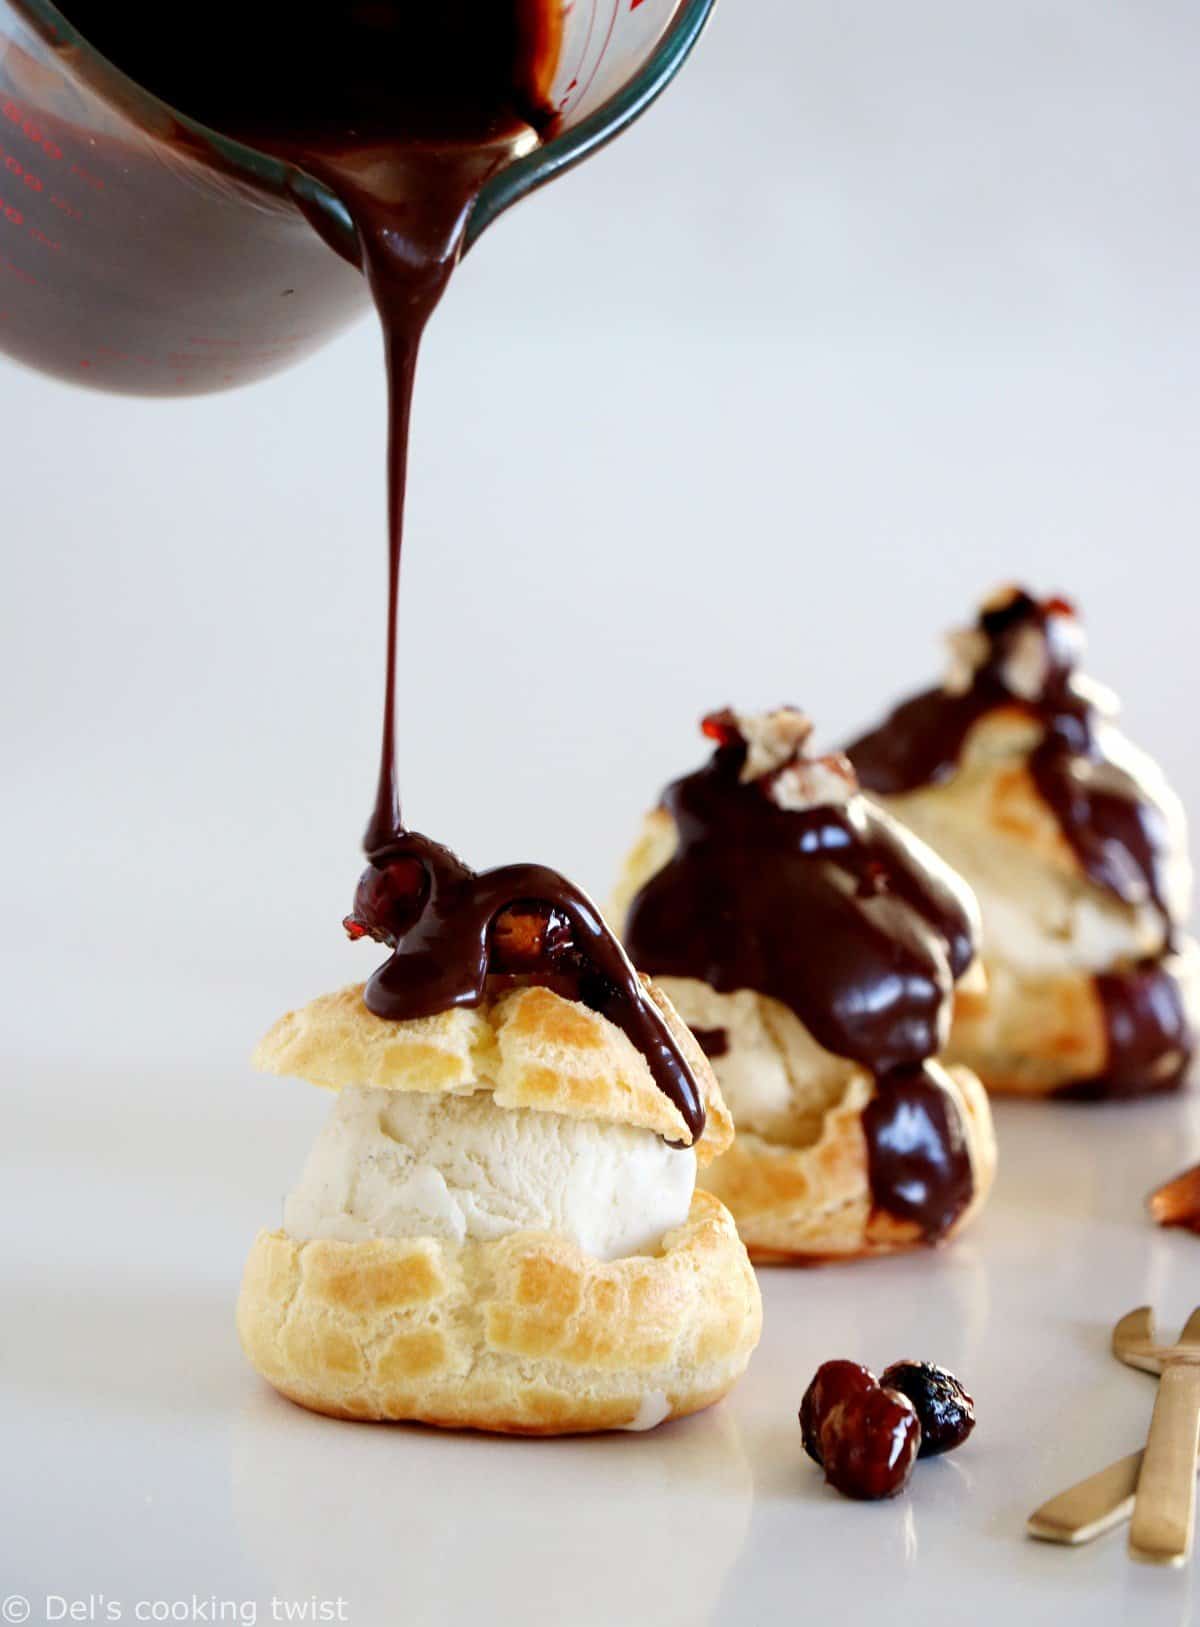 Chocolate Profiteroles with Candied Hazelnuts